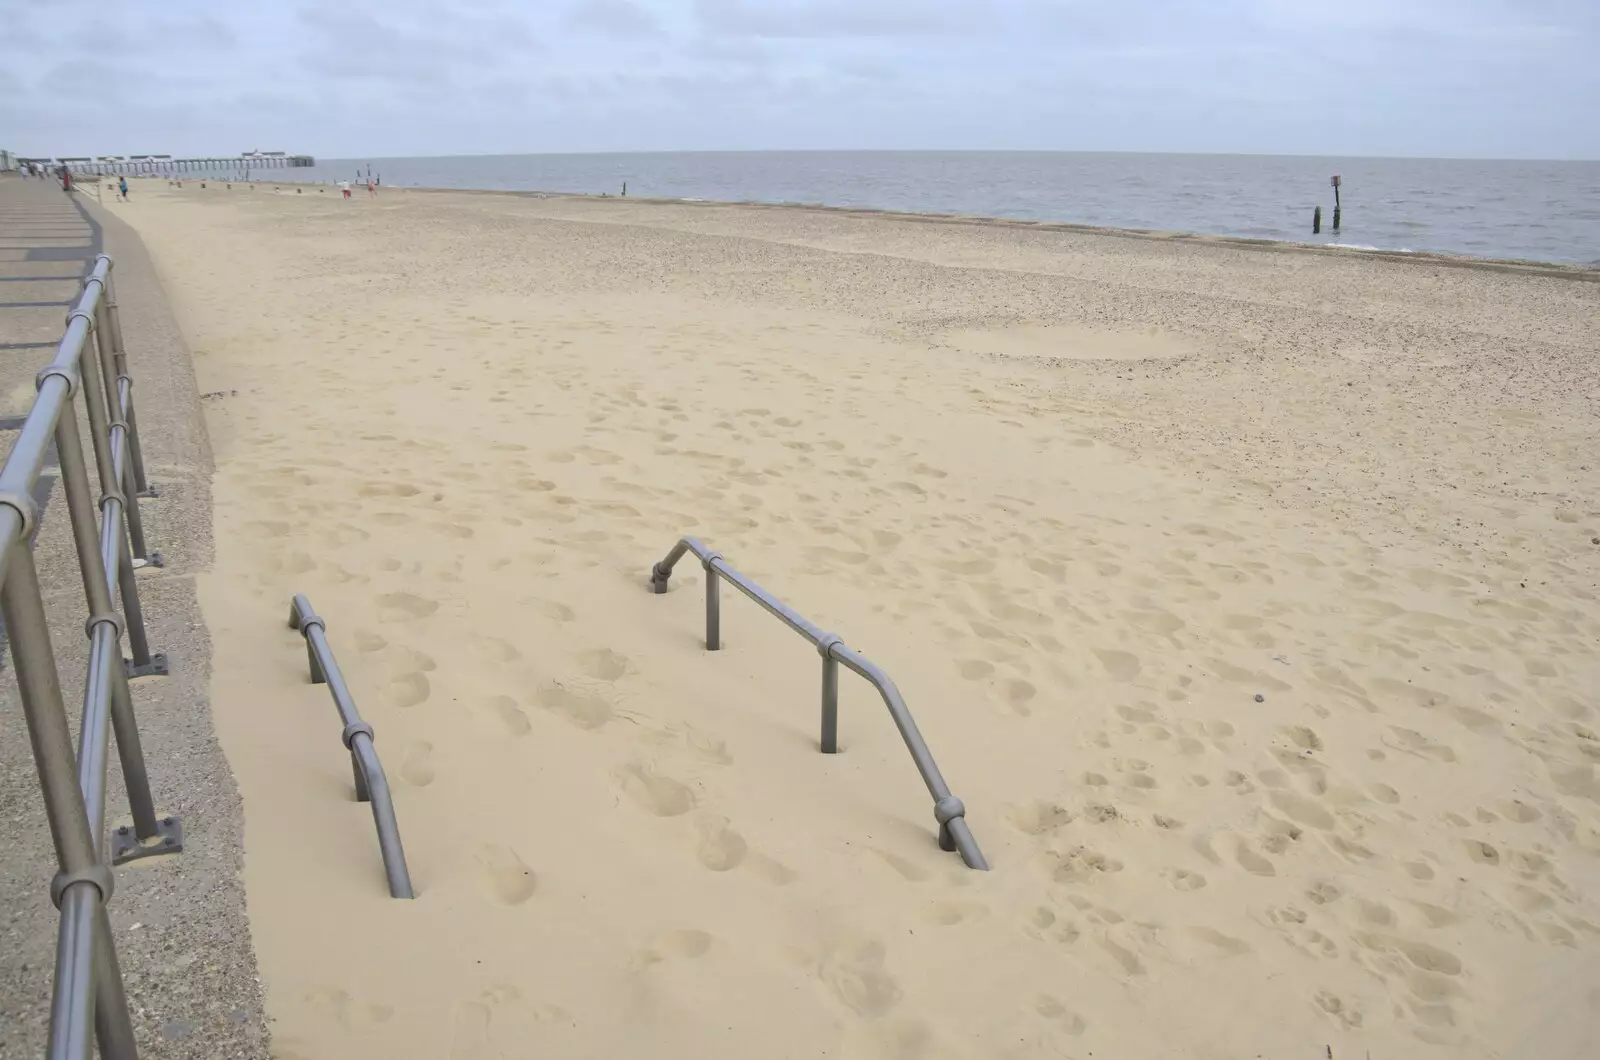 Steps over a groyne have been buried, from The Waverley Paddle Steamer at Southwold Pier, Suffolk - 27th September 2023